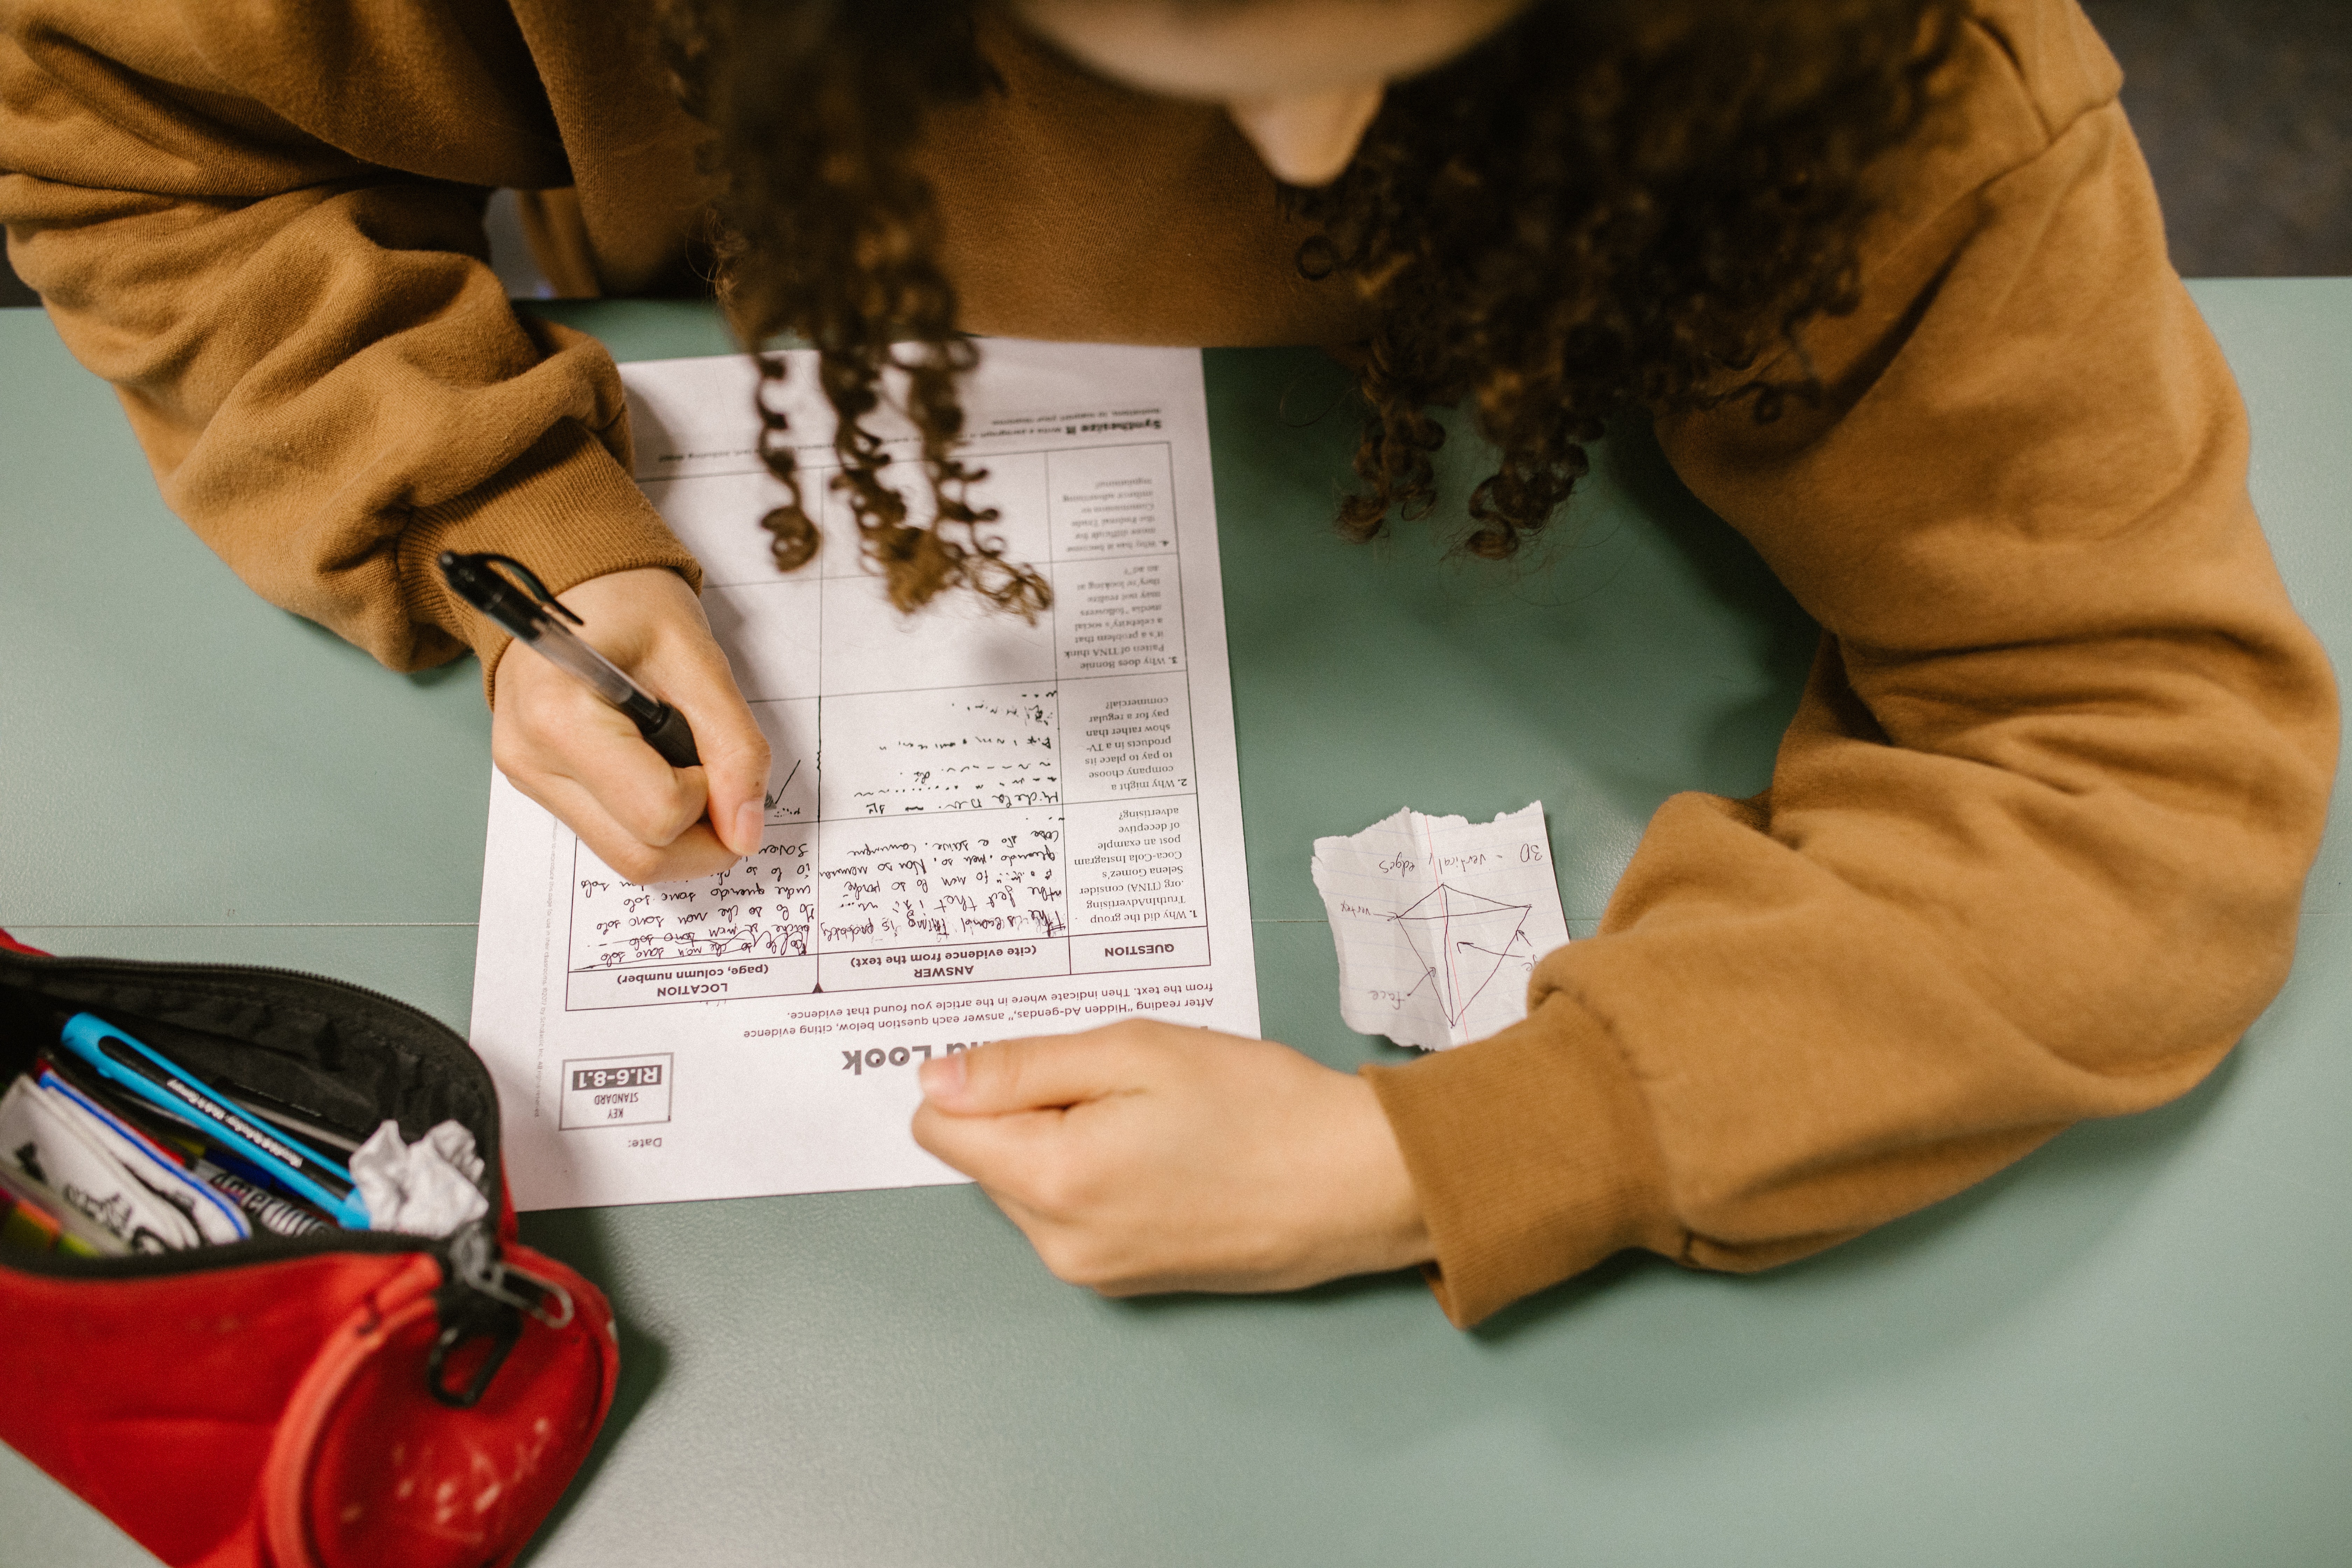 This image shows a young girl writing a test paper. She has a small piece of paper kept next to the test paper. It appears that she is trying to replicate the image on the piece of paper in a section of the test paper.